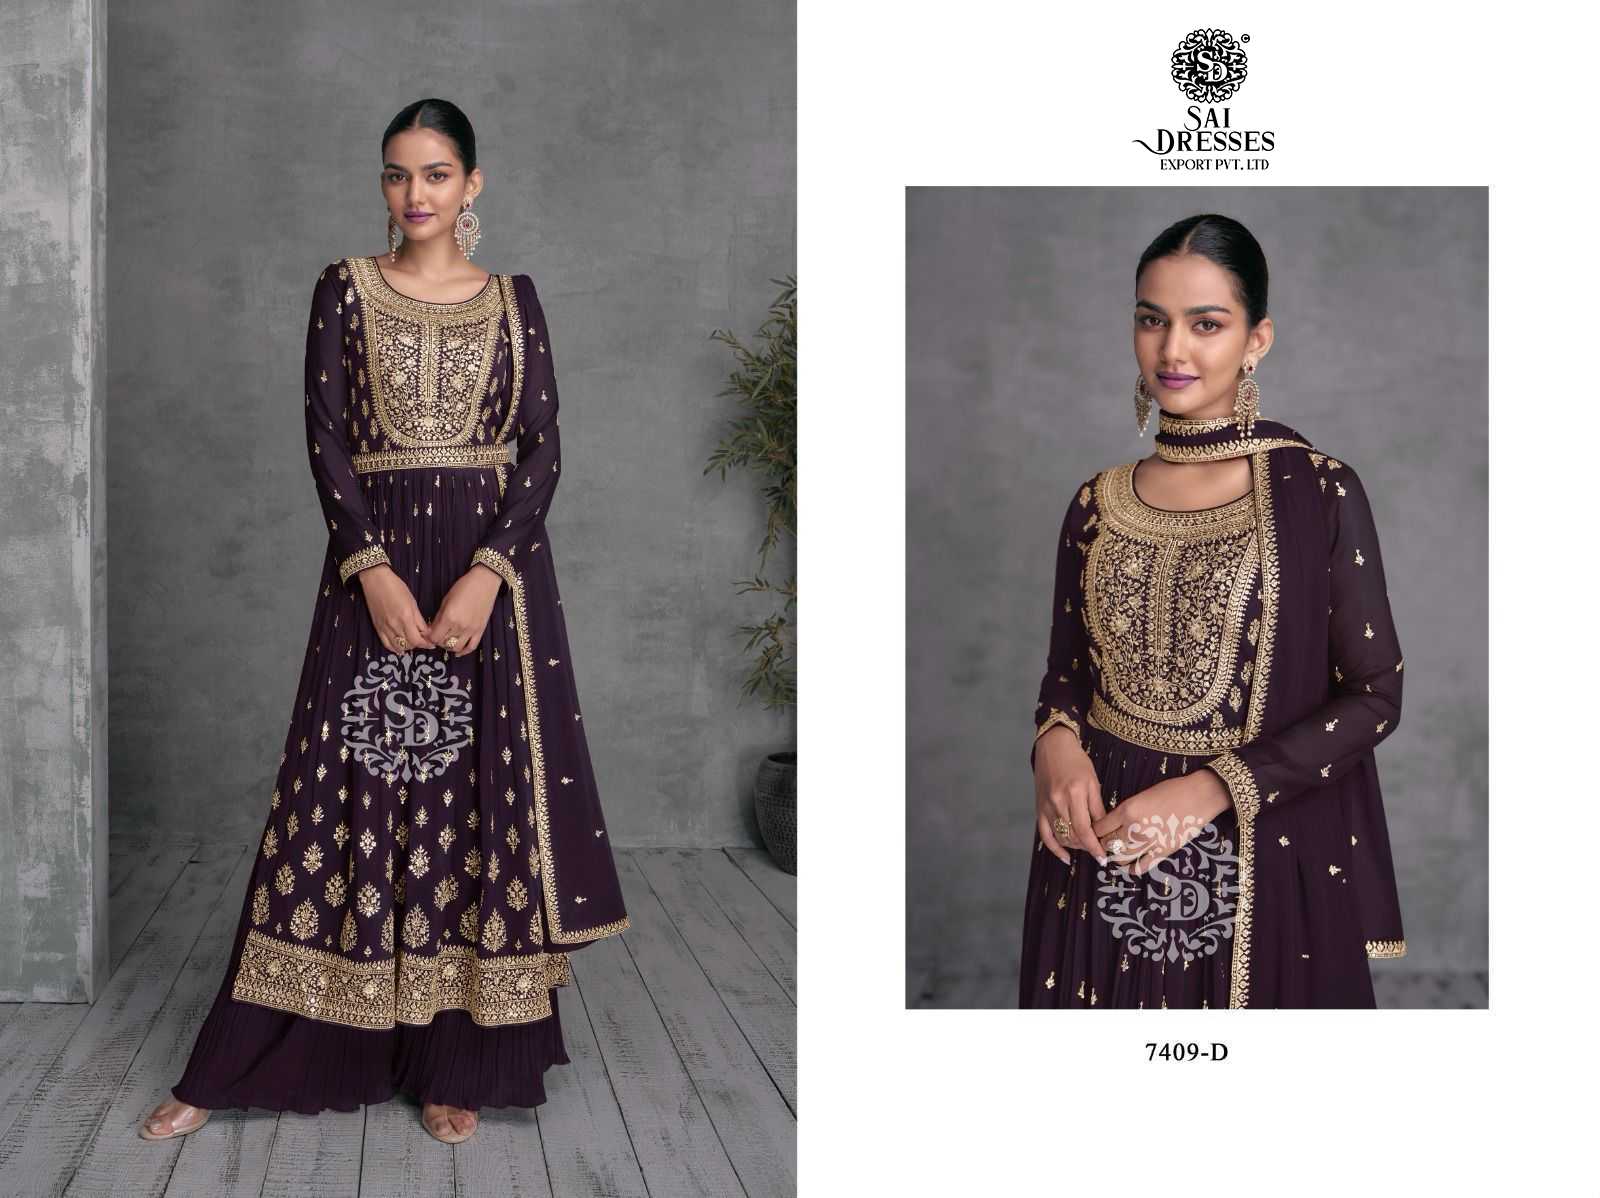 SAI DRESSES PRESENT DULARI READYMADE FESTIVE WEAR NAYRA CUT WITH PLAZZO STYLE DESIGNER SUITS IN WHOLESALE RATE IN SURAT